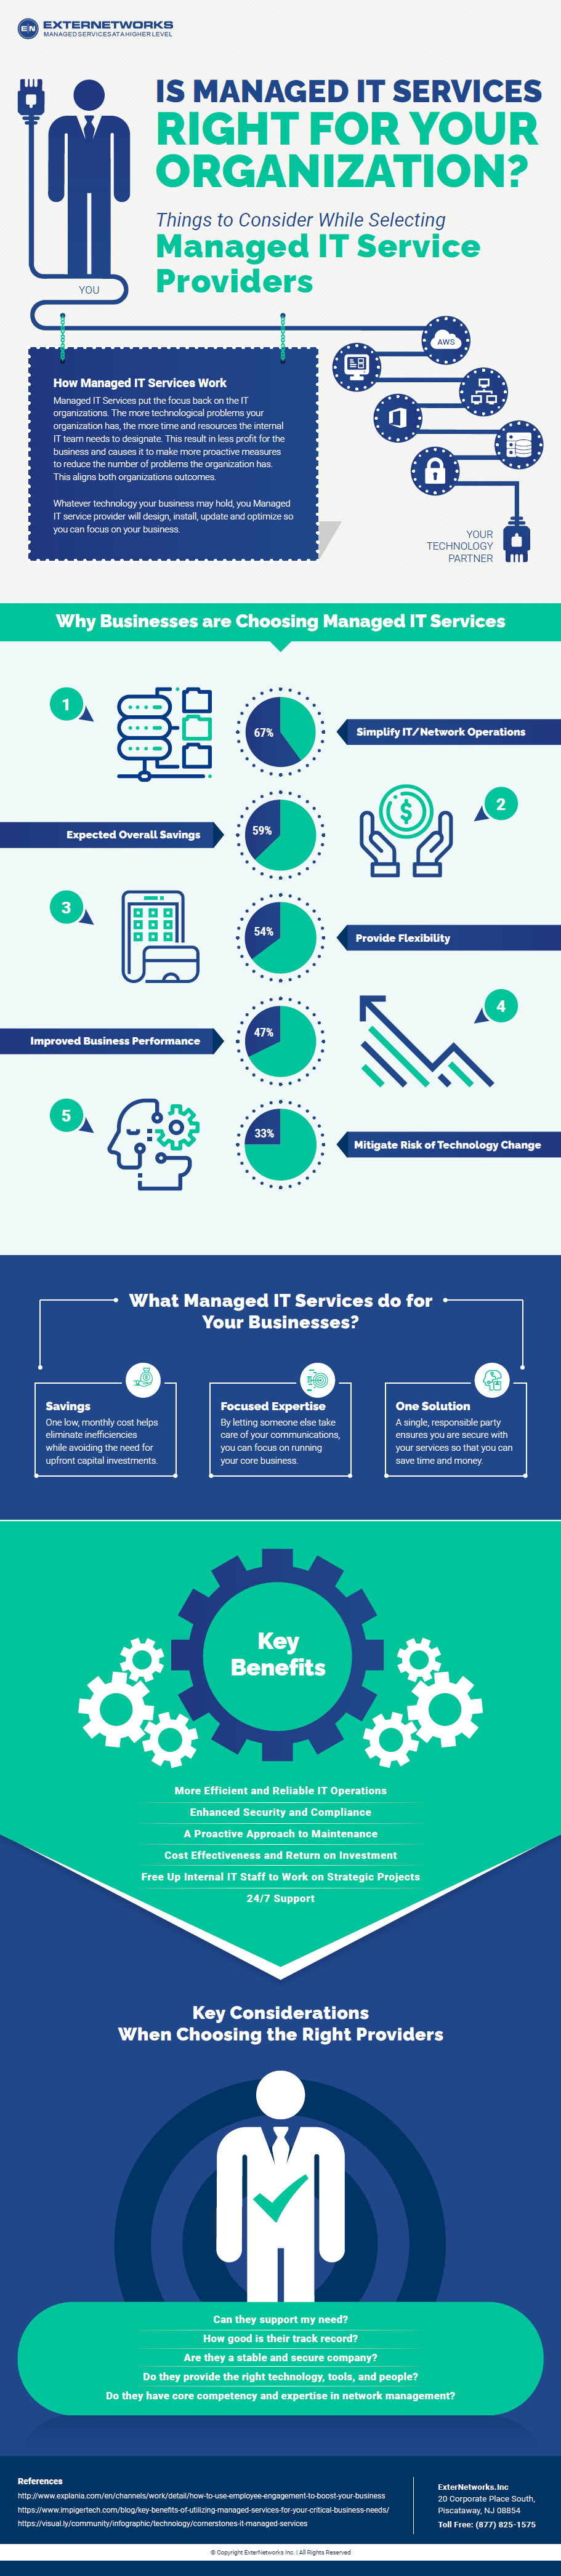 IT Managed Service Providers Infographic